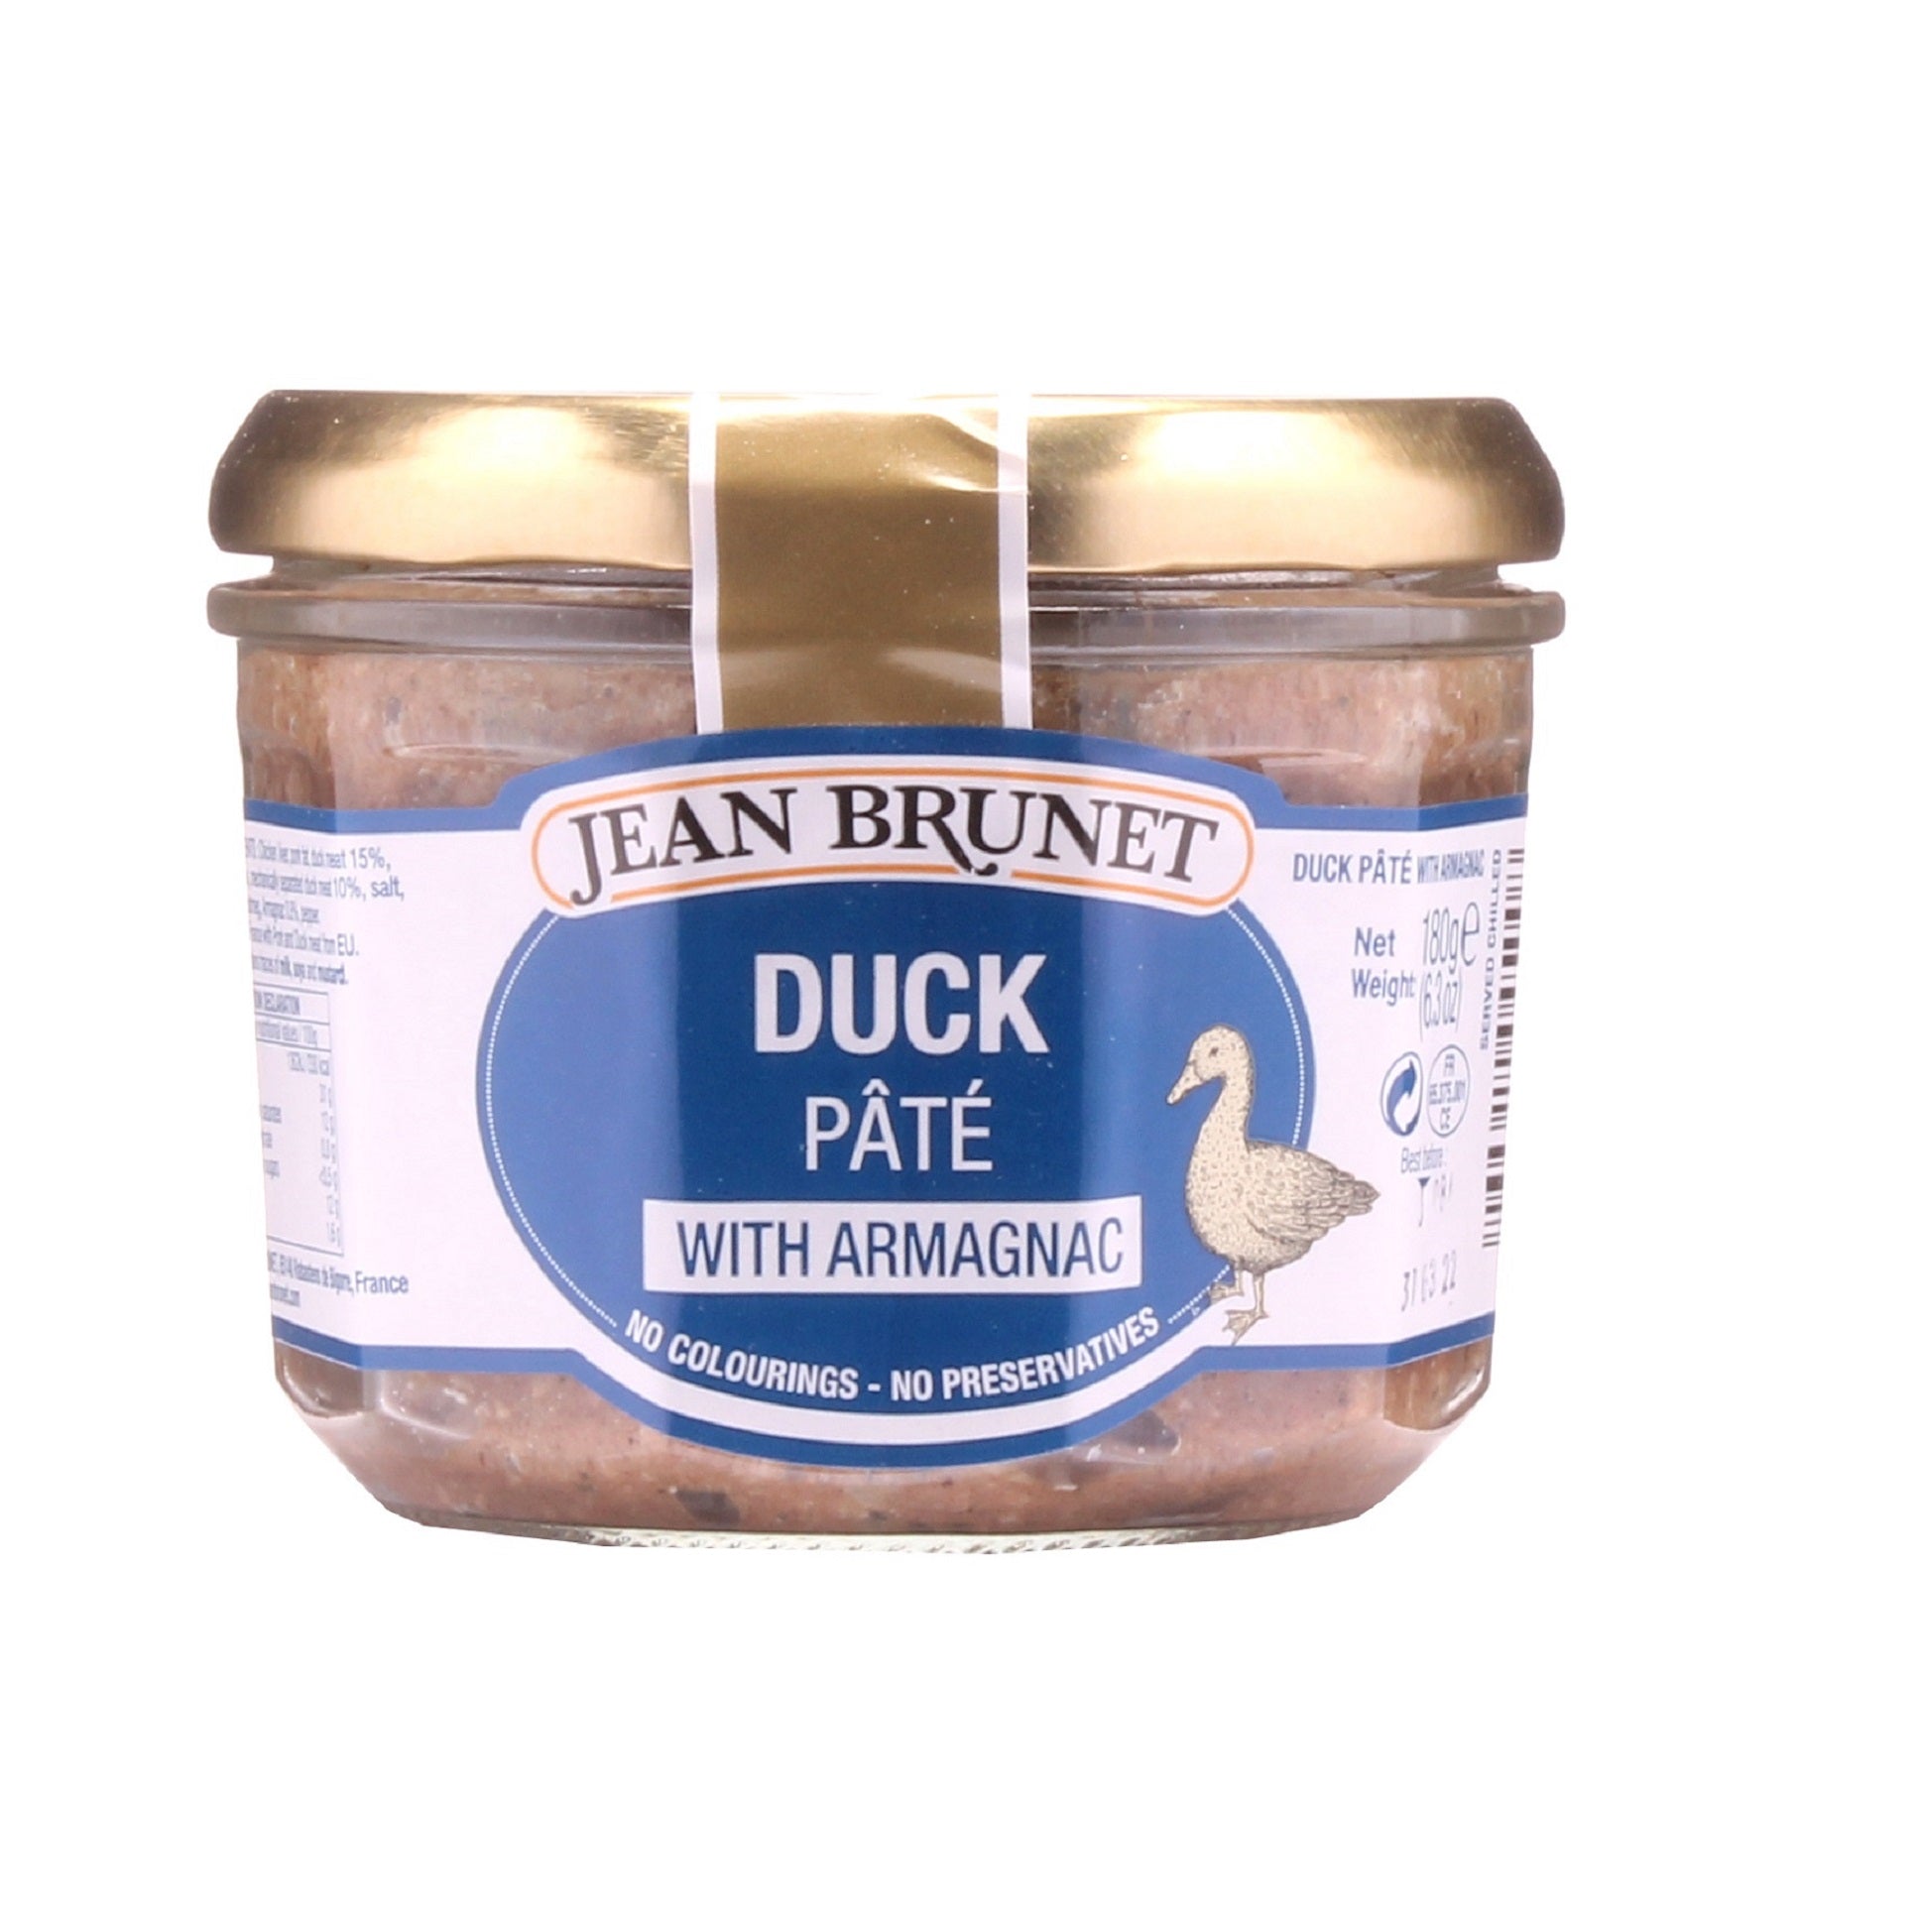 JEAN BRUNET DUCK PATE WITH ARMAGNAC 180g